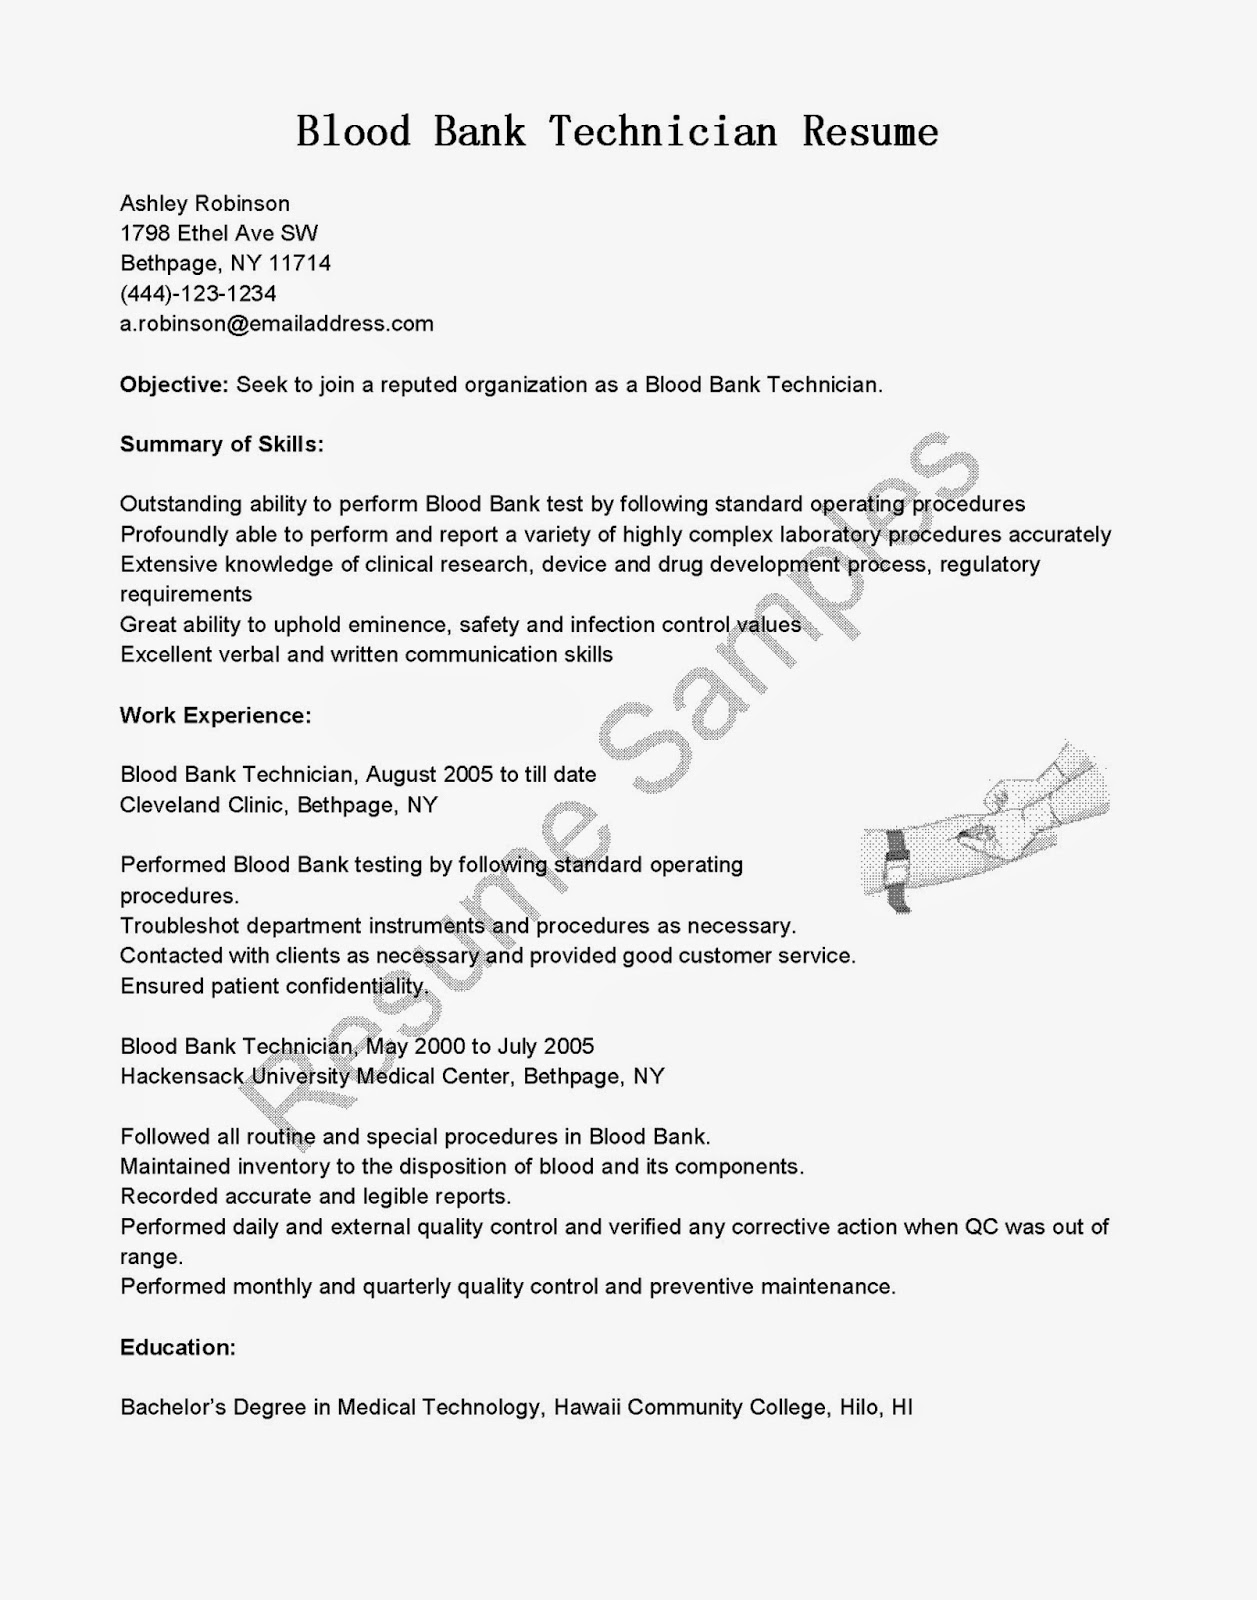 Resume examples banker